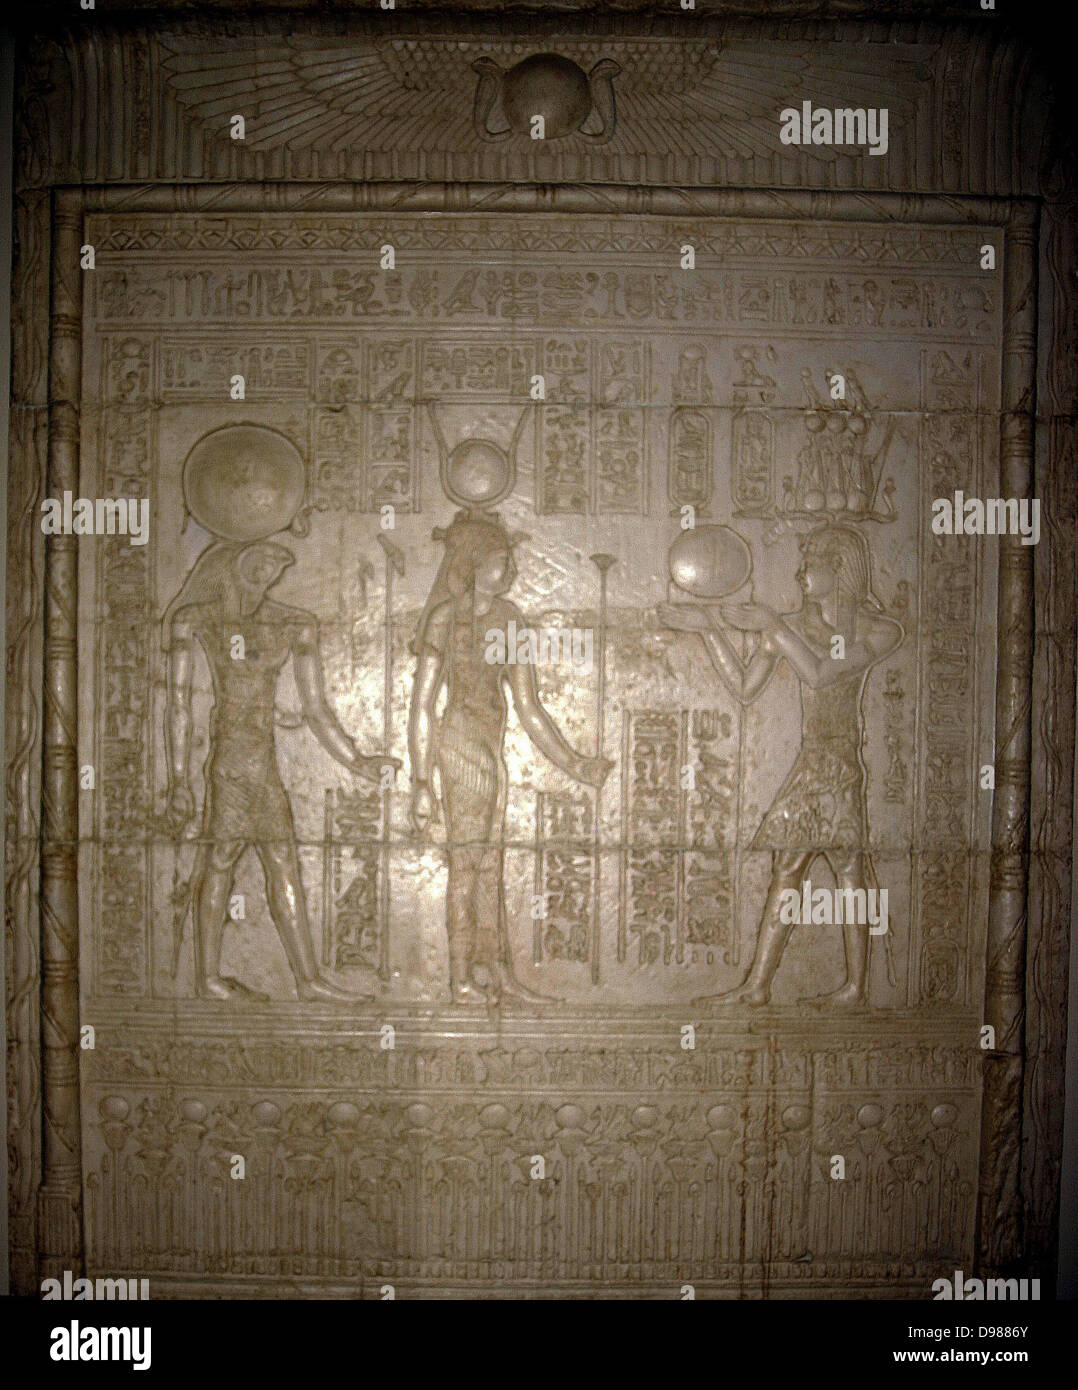 Egyptian Tomb relief showing Isis and Horus receiving offerings from a Pharaoh. Stock Photo